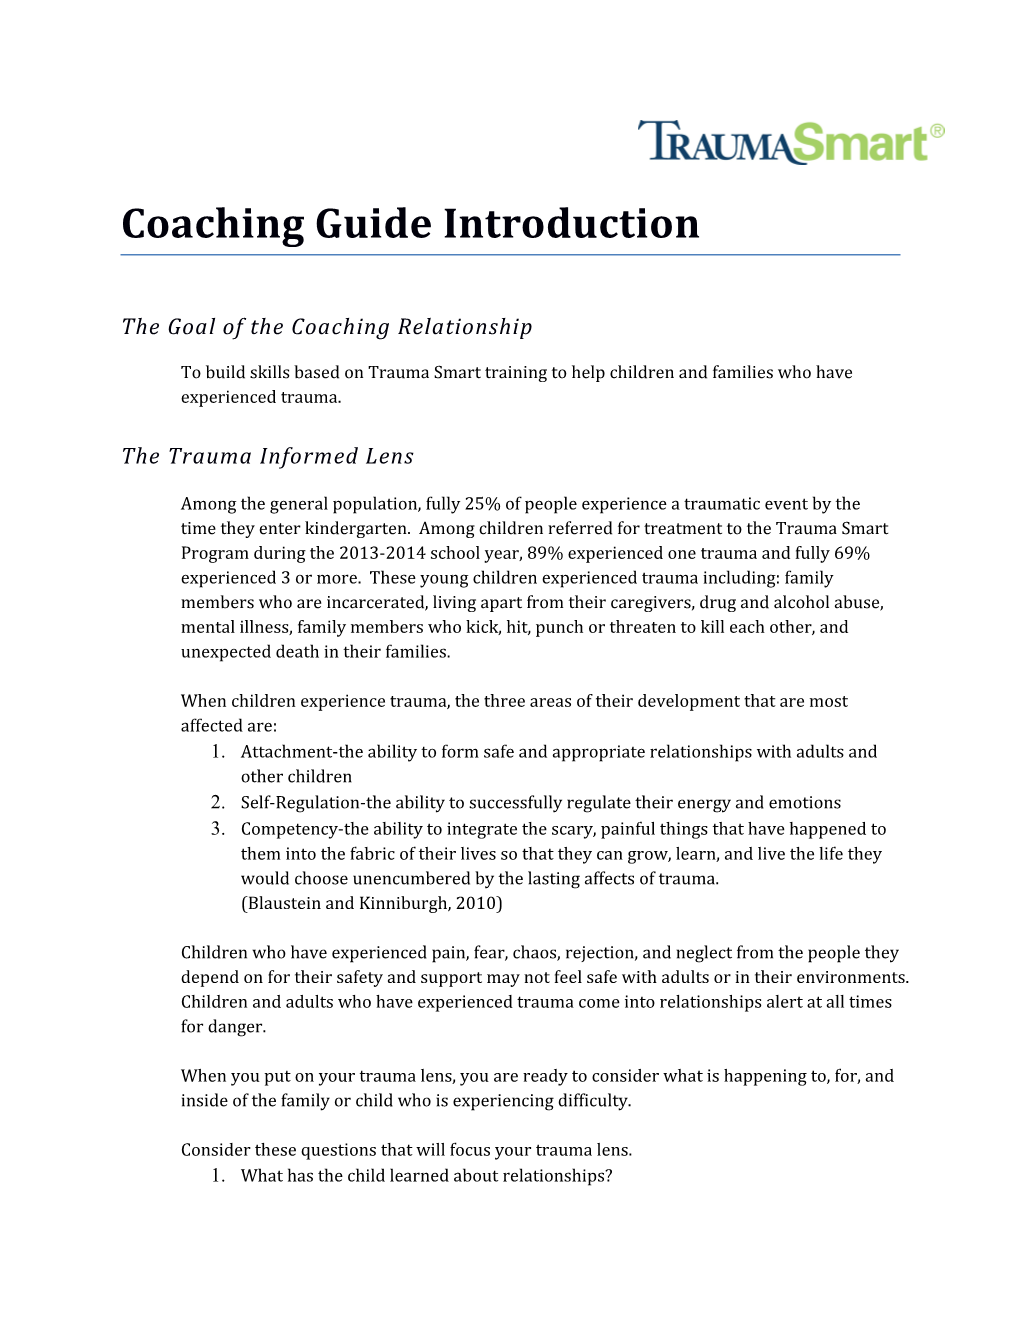 The Goal of the Coaching Relationship